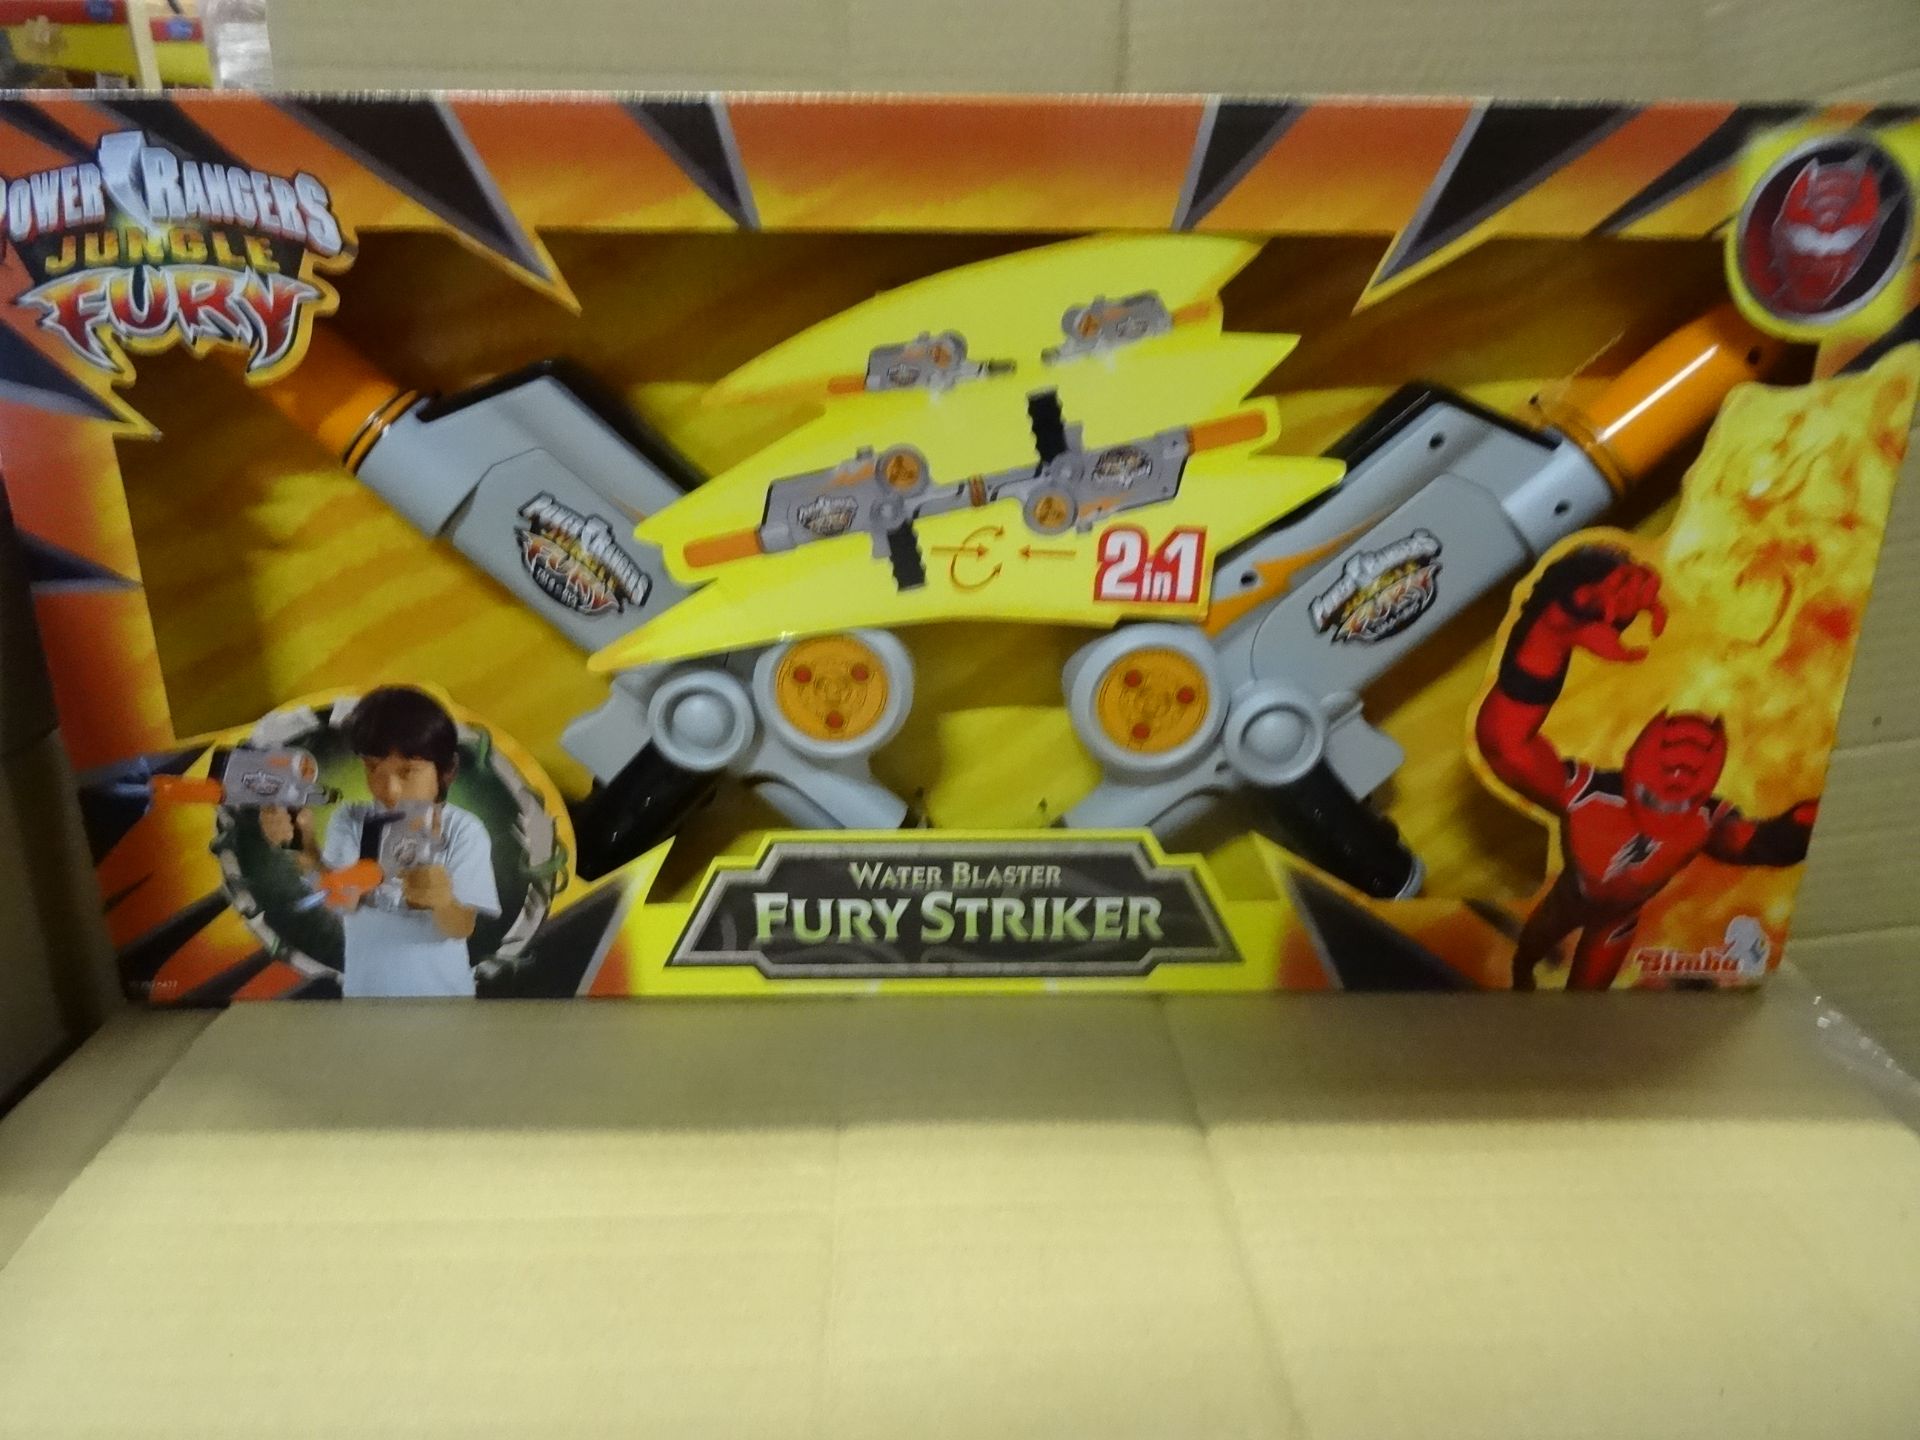 12 x Power Rangers Jungle Fury Water Blasters 2 in 1. High Quality Water Blaster. Brand new and